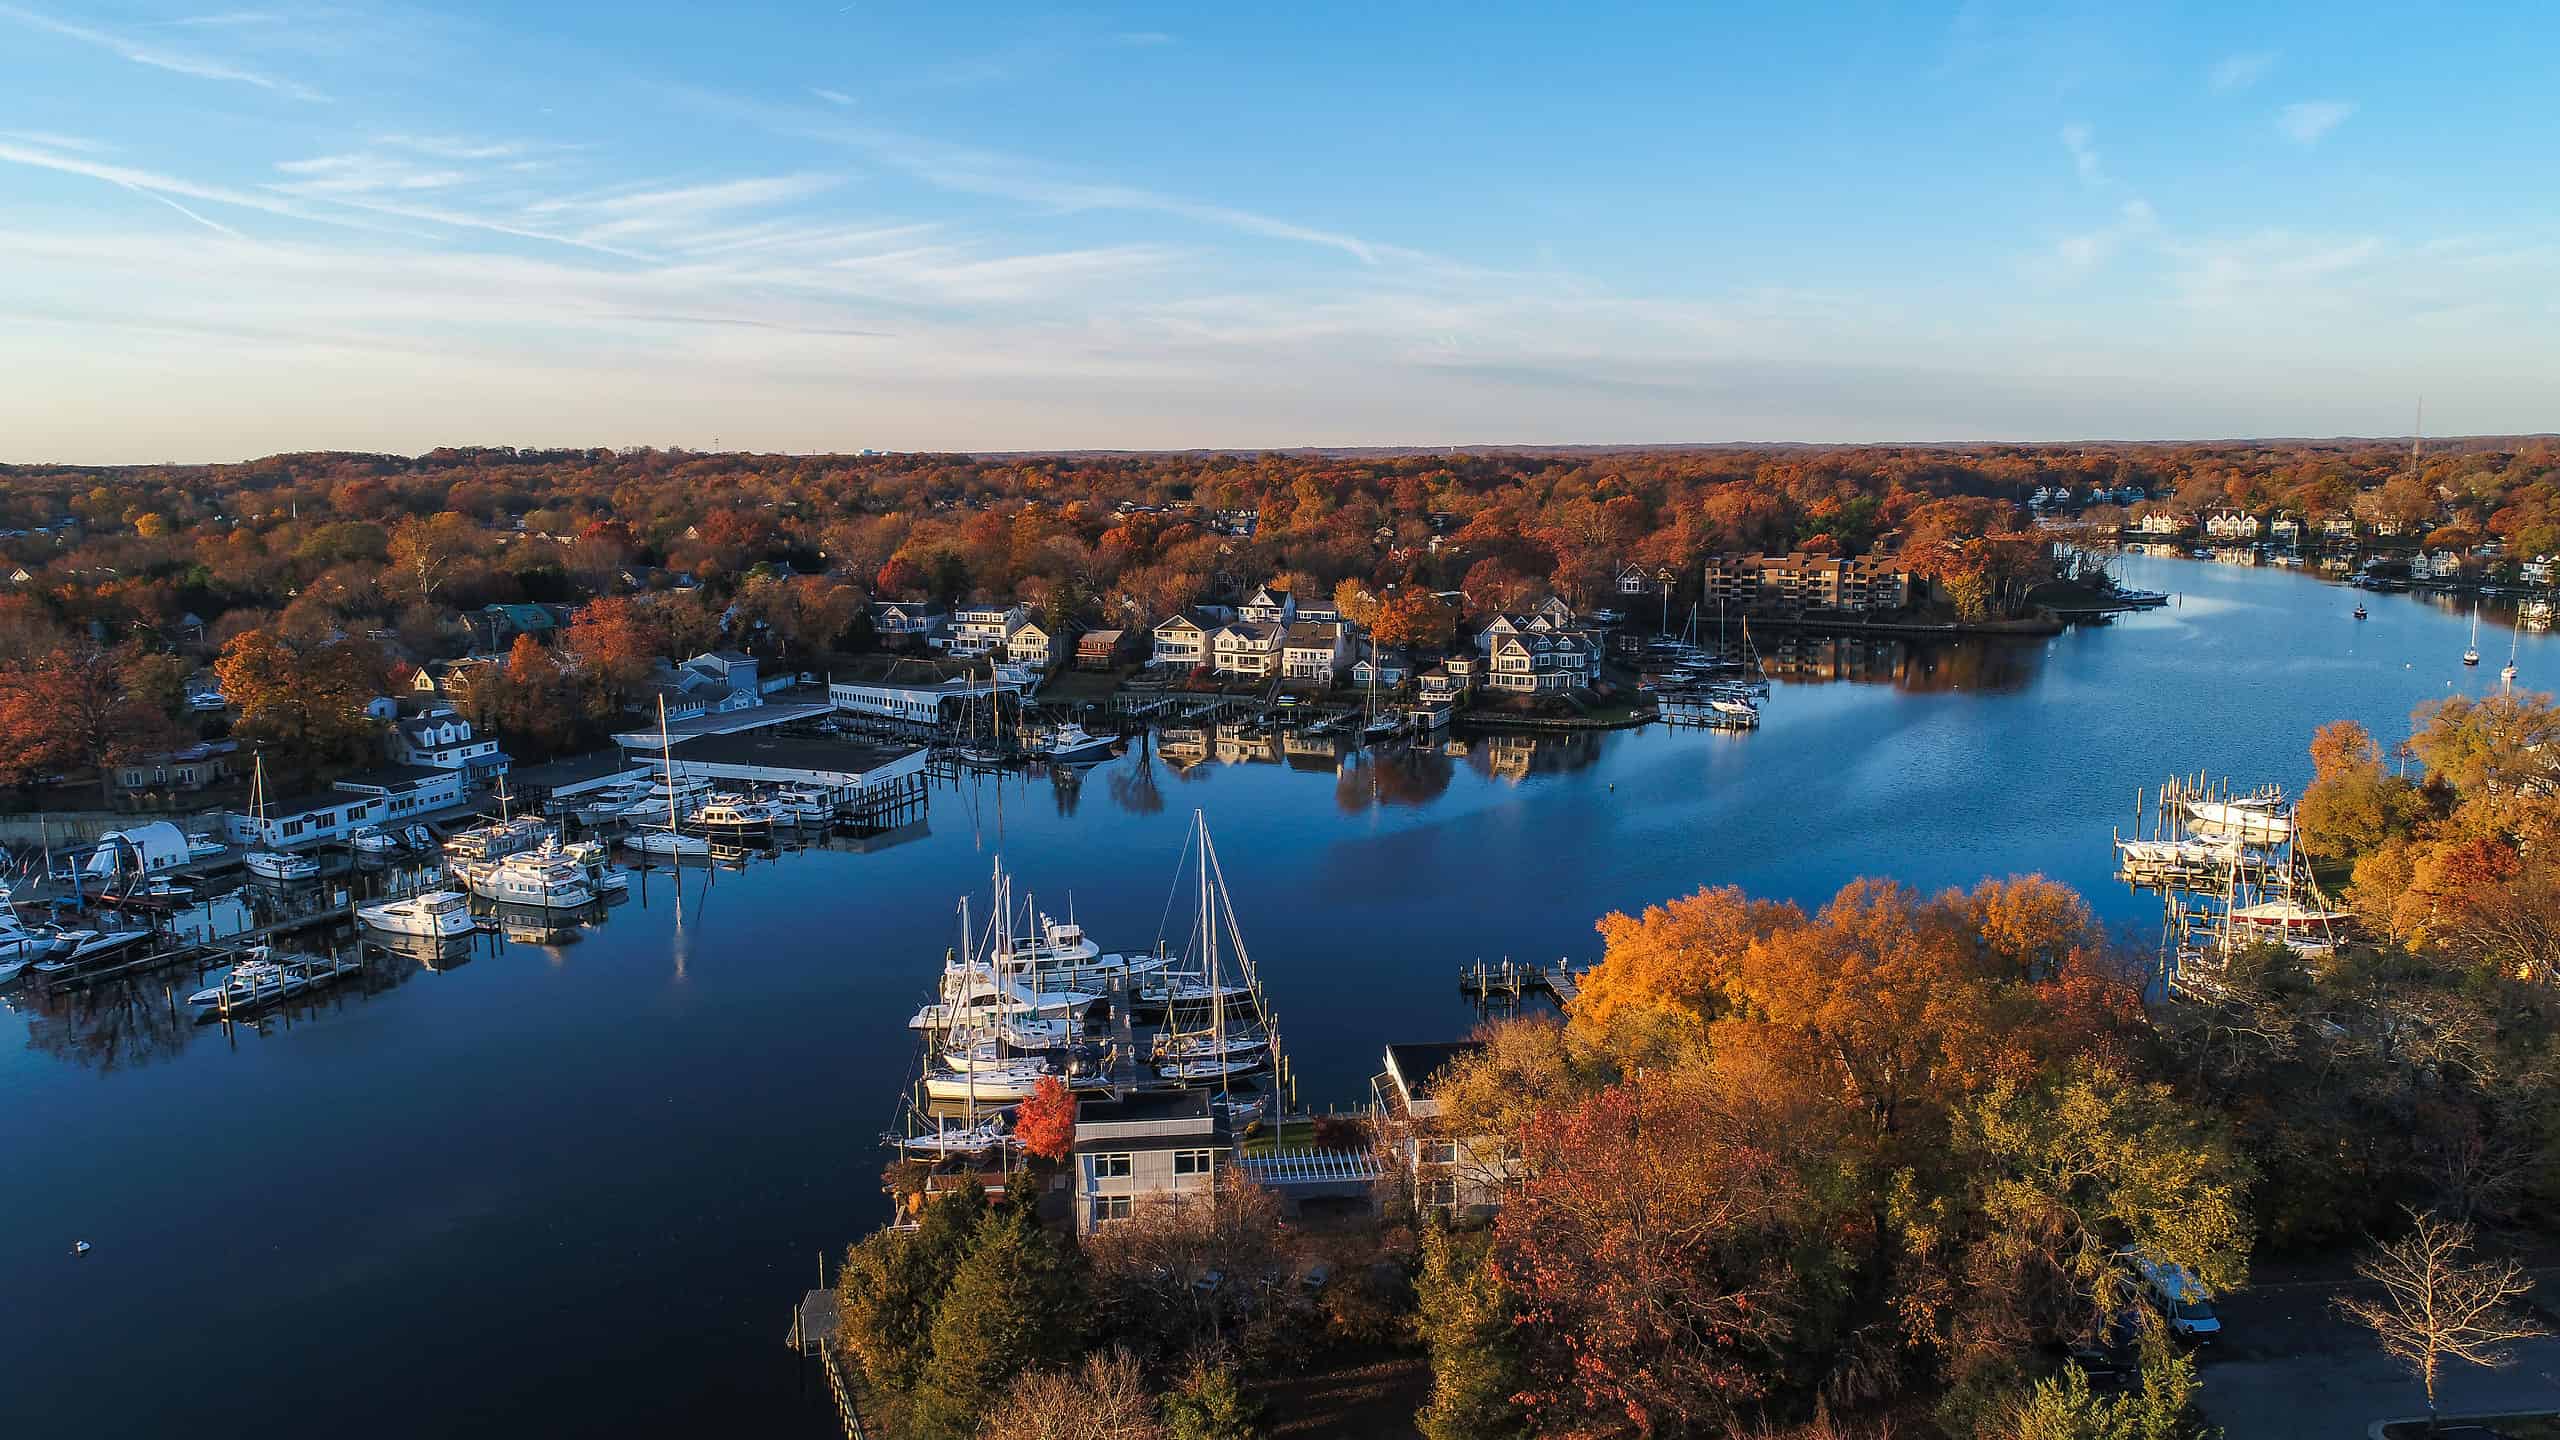 Chesapeake Bay, Annapolis in Maryland